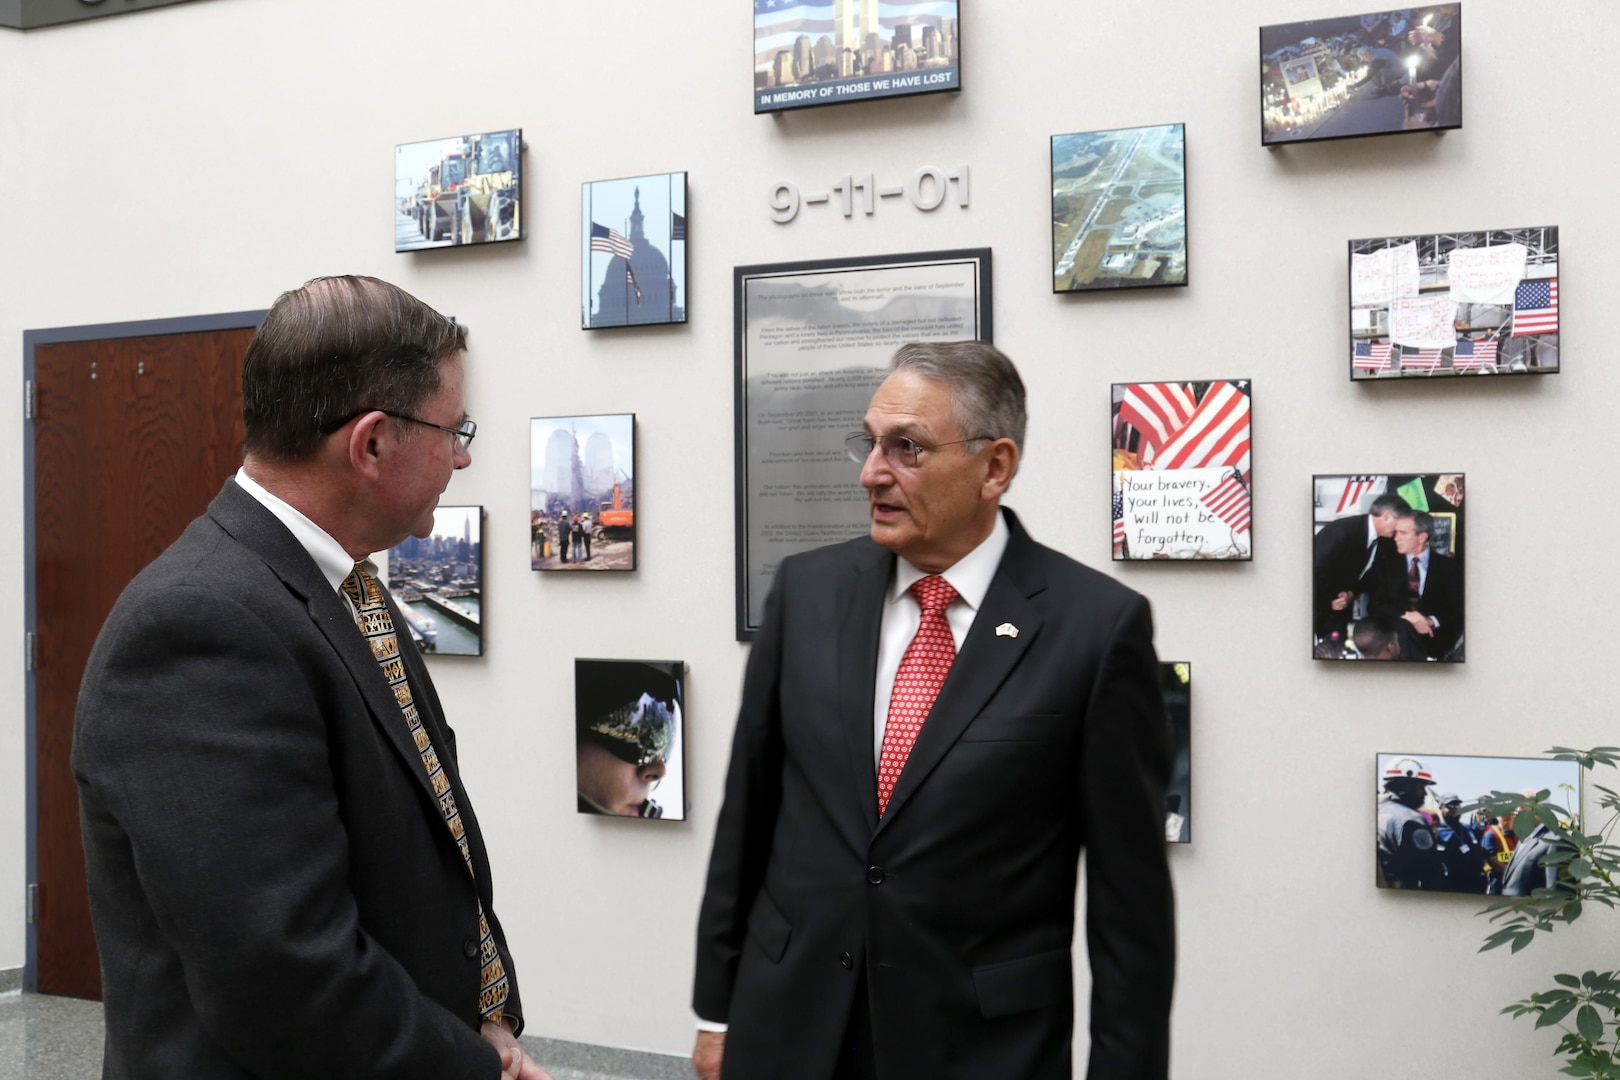 Mr. Luis Felipe Puente (right), Mexico's National Coordinator for Civil Protection, visited the 9-11 Memorial at NORAD and USNORTHCOM with Mr.
Randel Zeller (left), Director of NORAD and USNORTHCOM Interagency Directorate, during his visit April 13, 2016. Mr. Puente's visit was an exchange of information on disaster response and preparation. 
